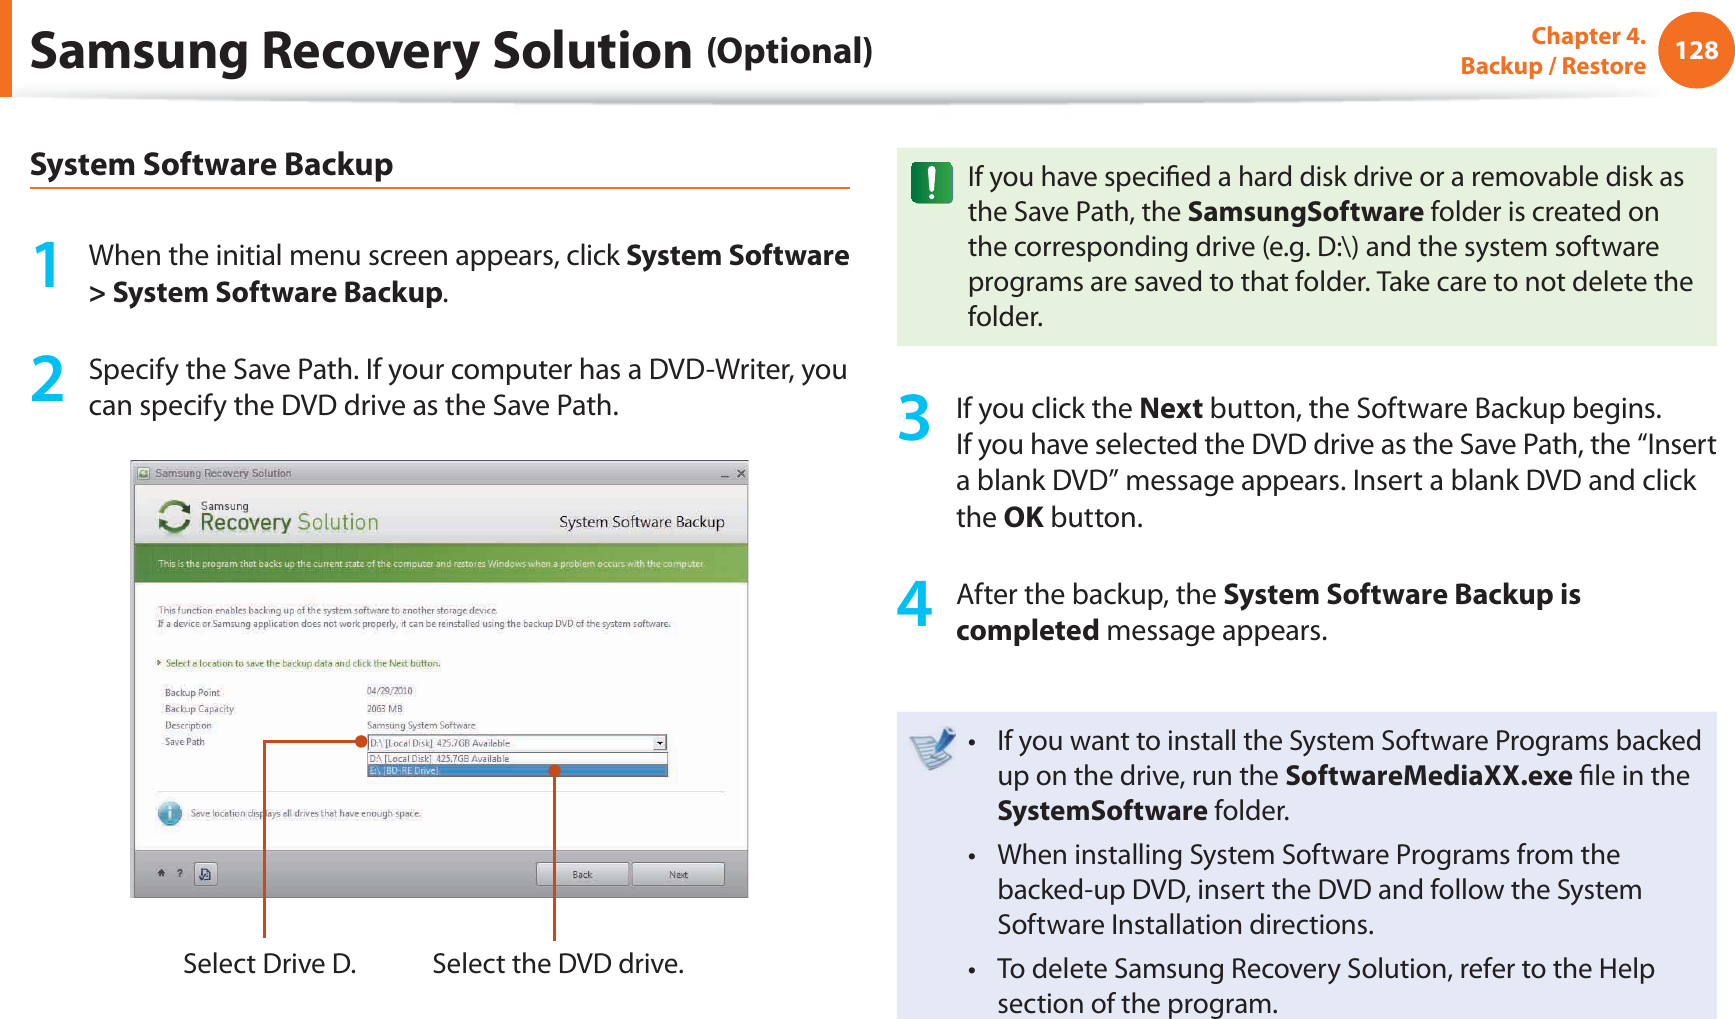 128Chapter 4.  Backup / RestoreSamsung Recovery Solution (Optional)System Software Backup1  When the initial menu screen appears, click System Software &gt; System Software Backup.2  Specify the Save Path. If your computer has a DVD-Writer, you can specify the DVD drive as the Save Path.Select Drive D. Select the DVD drive.If you have speciﬁ ed a hard disk drive or a removable disk as the Save Path, the SamsungSoftware folder is created on the corresponding drive (e.g. D:\) and the system software programs are saved to that folder. Take care to not delete the folder. 3  If you click the Next button, the Software Backup begins. If you have selected the DVD drive as the Save Path, the “Insert a blank DVD” message appears. Insert a blank DVD and click the OK button.4  After the backup, the System Software Backup is completed message appears.If you want to install the System Software Programs backed t up on the drive, run the SoftwareMediaXX.exe ﬁ le in the SystemSoftware folder.When installing System Software Programs from the t backed-up DVD, insert the DVD and follow the System Software Installation directions.To delete Samsung Recovery Solution, refer to the Help t section of the program.